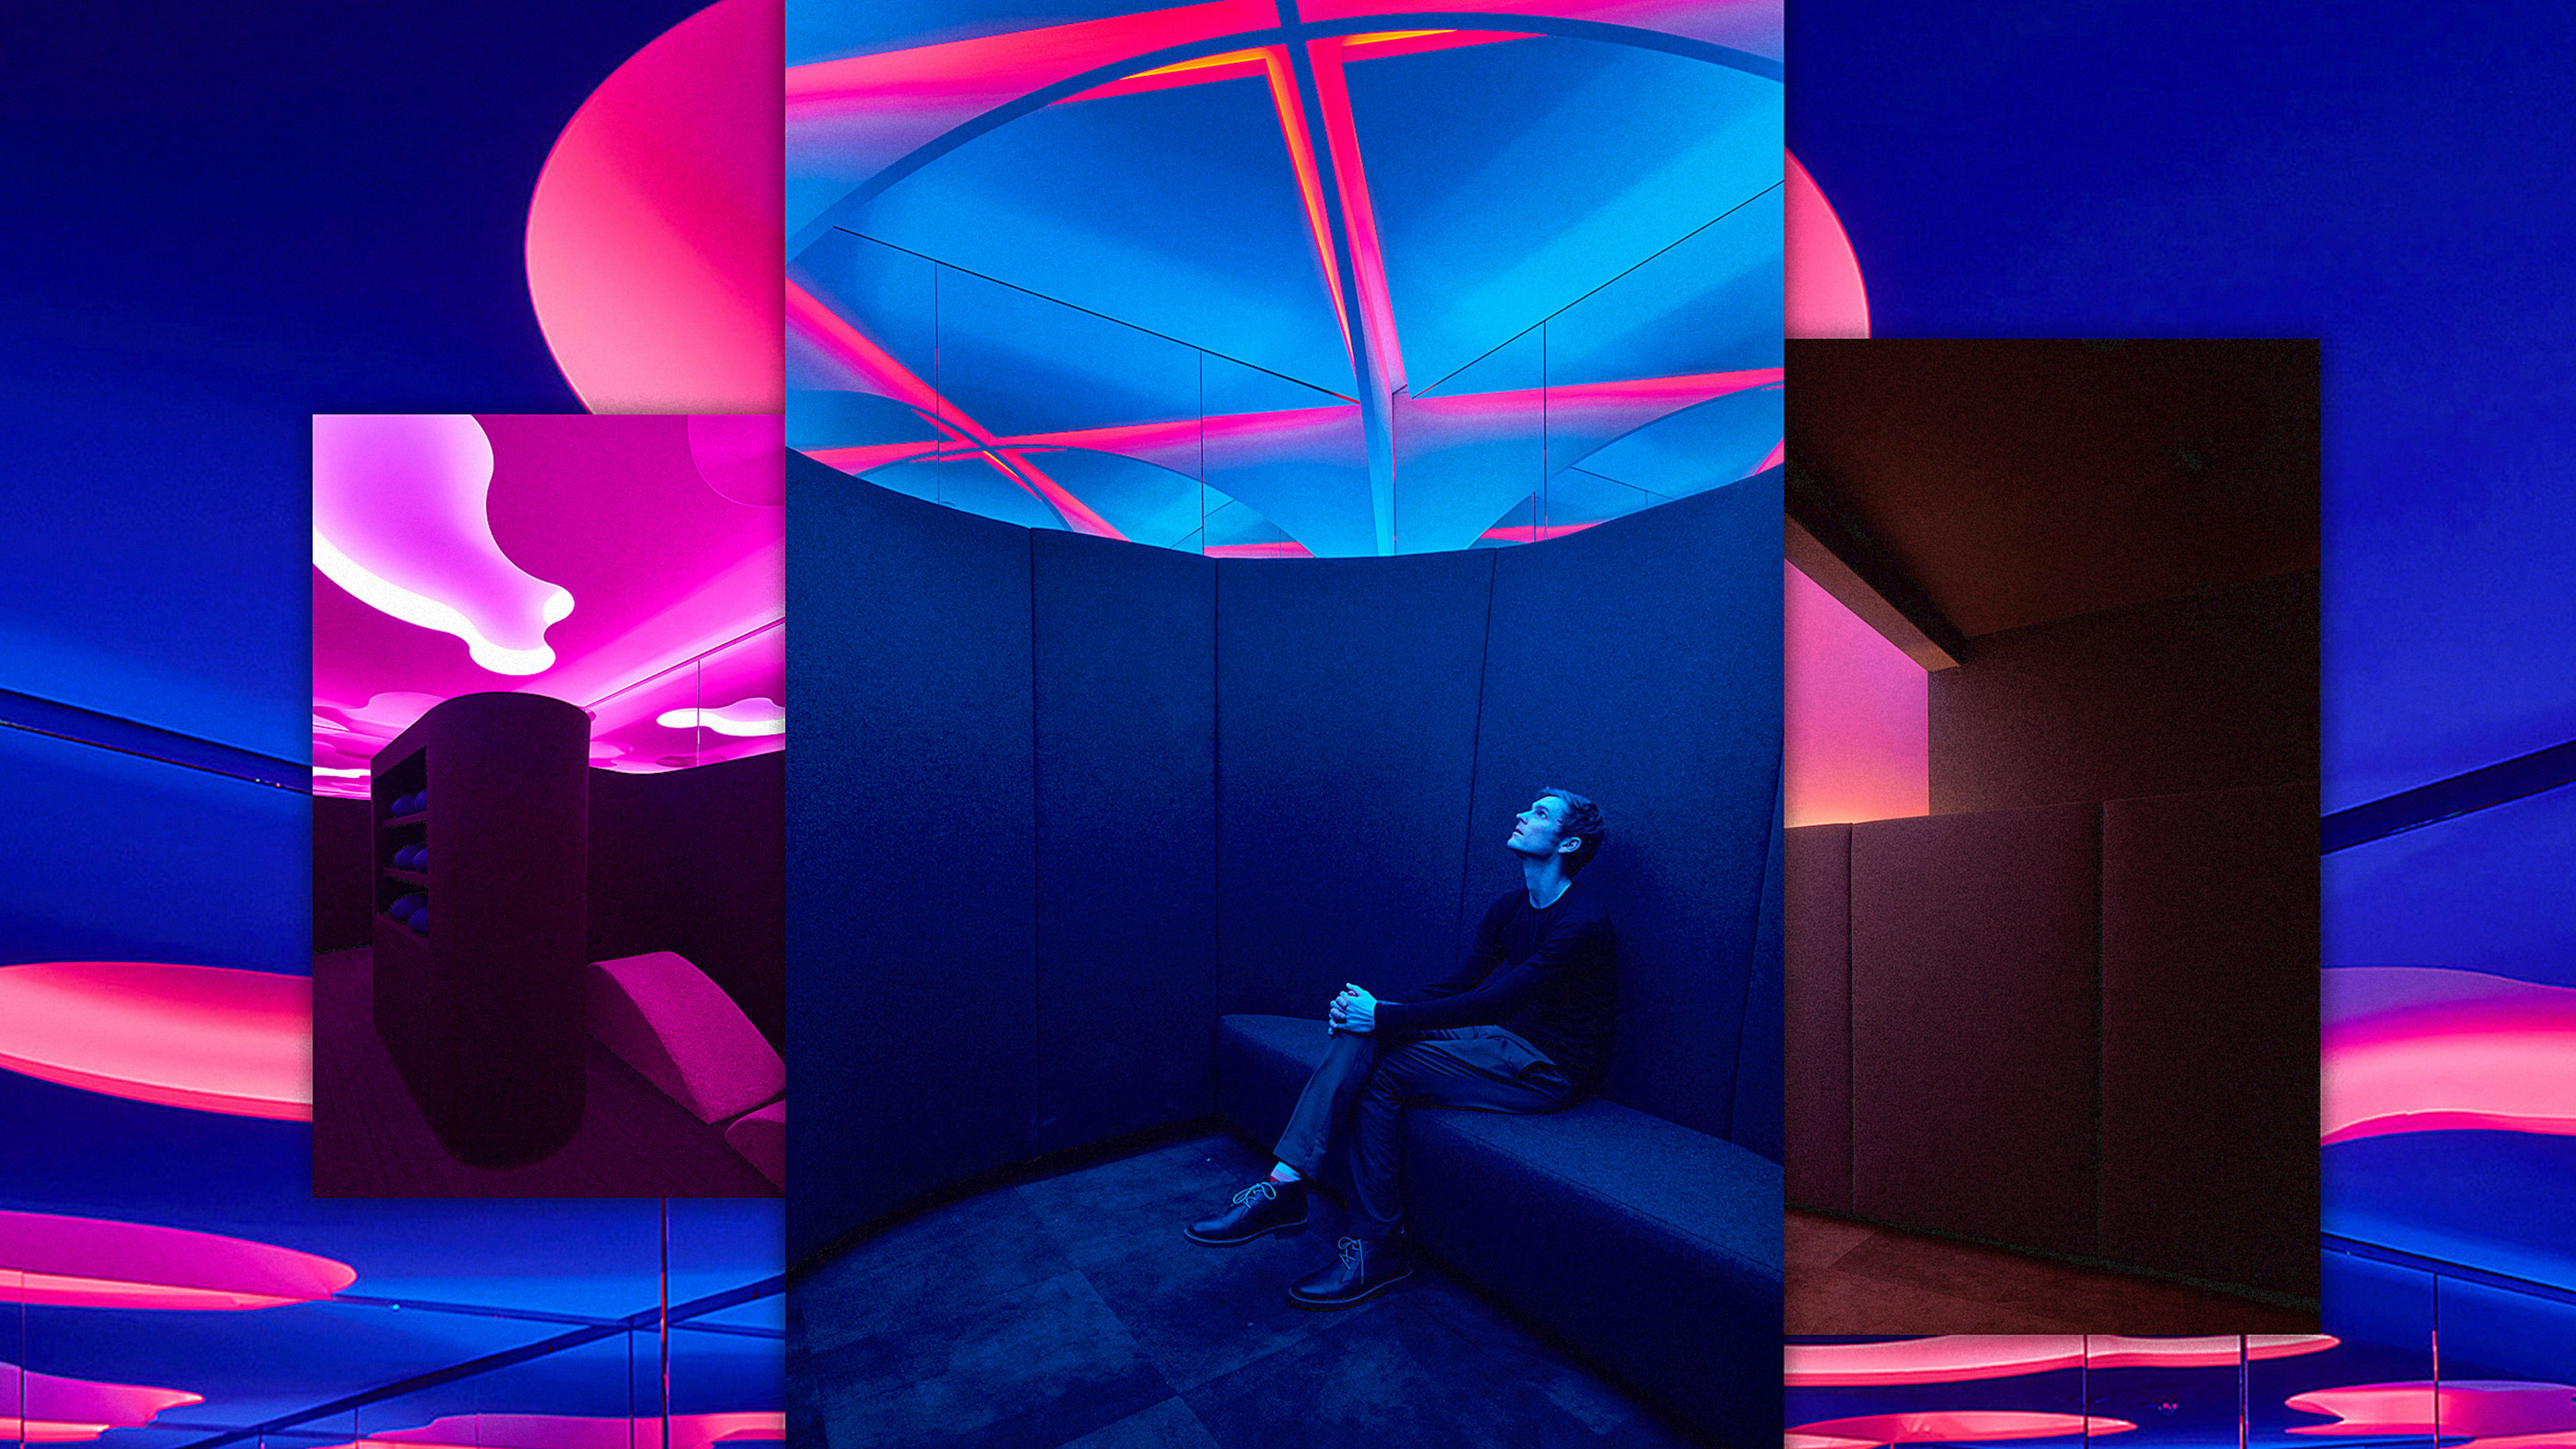 See the hypnotic meditation rooms Google plans to add to some offices